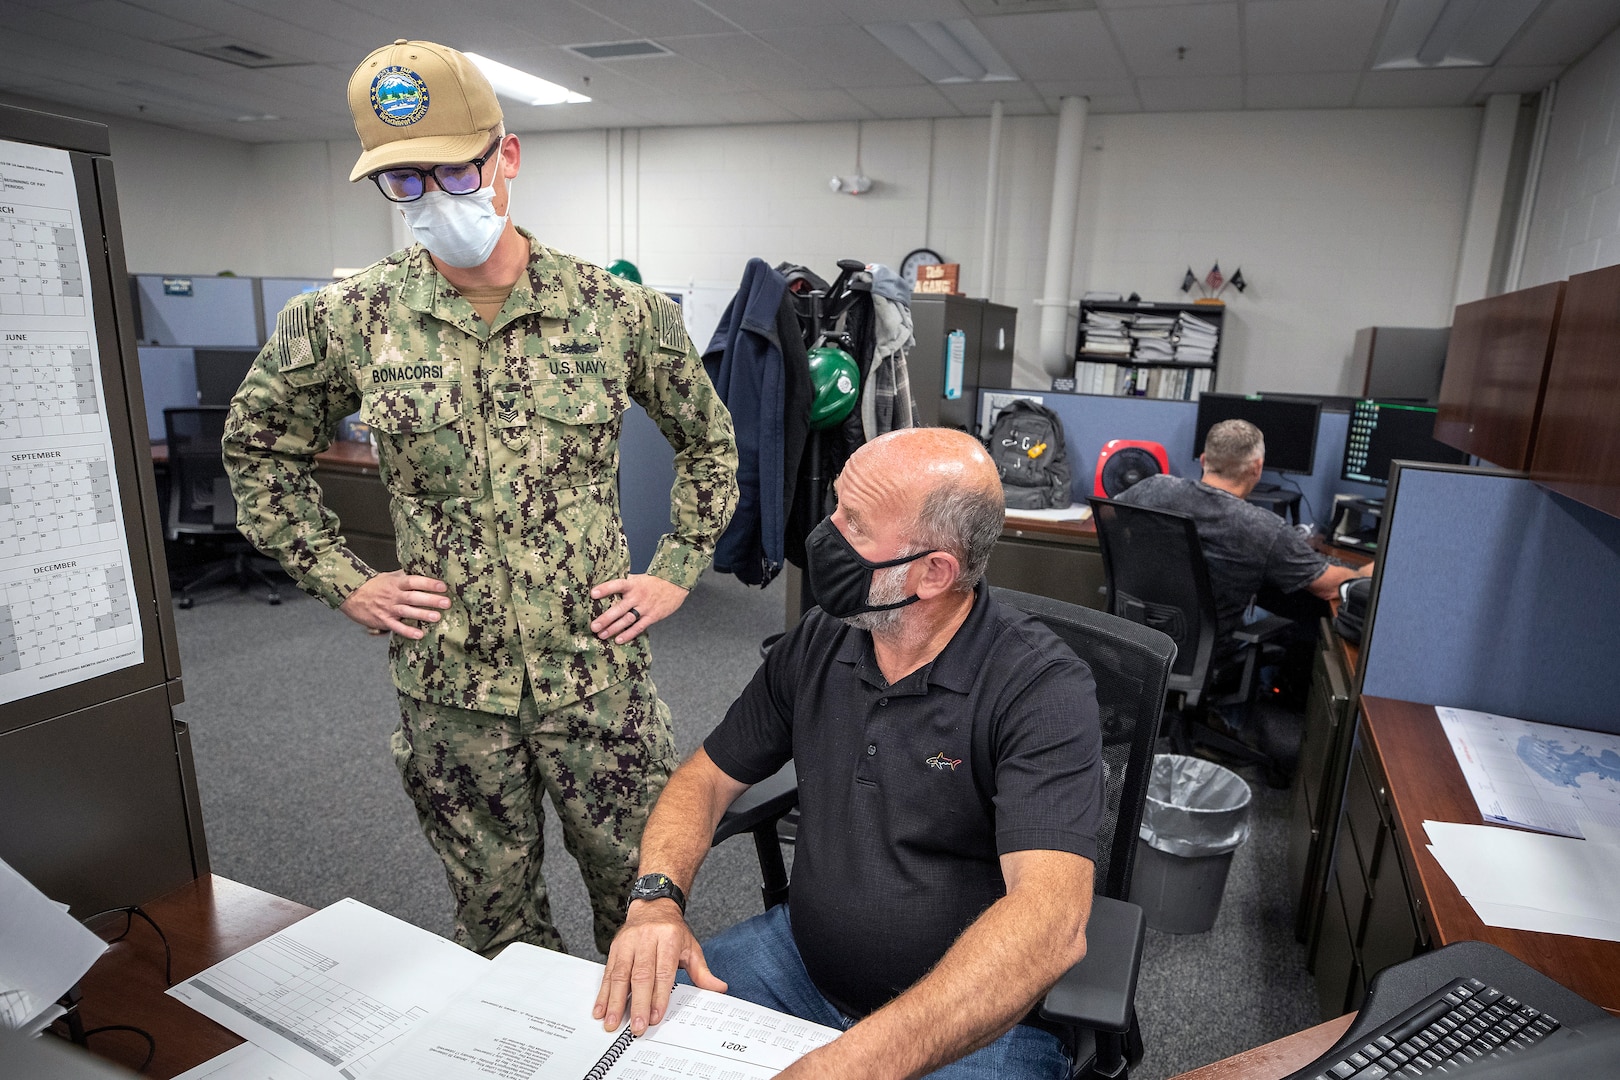 Electrician's Mate 1st Class Cory Bonacorsi, left, a newly-arrived Surge Main Sailor, talks with Steven Hall, Code 210.3 engineer, July 15, 2020 in the office at Puget Sound Naval Shipyard & Intermediate Maintenance Facility Detachment Everett.